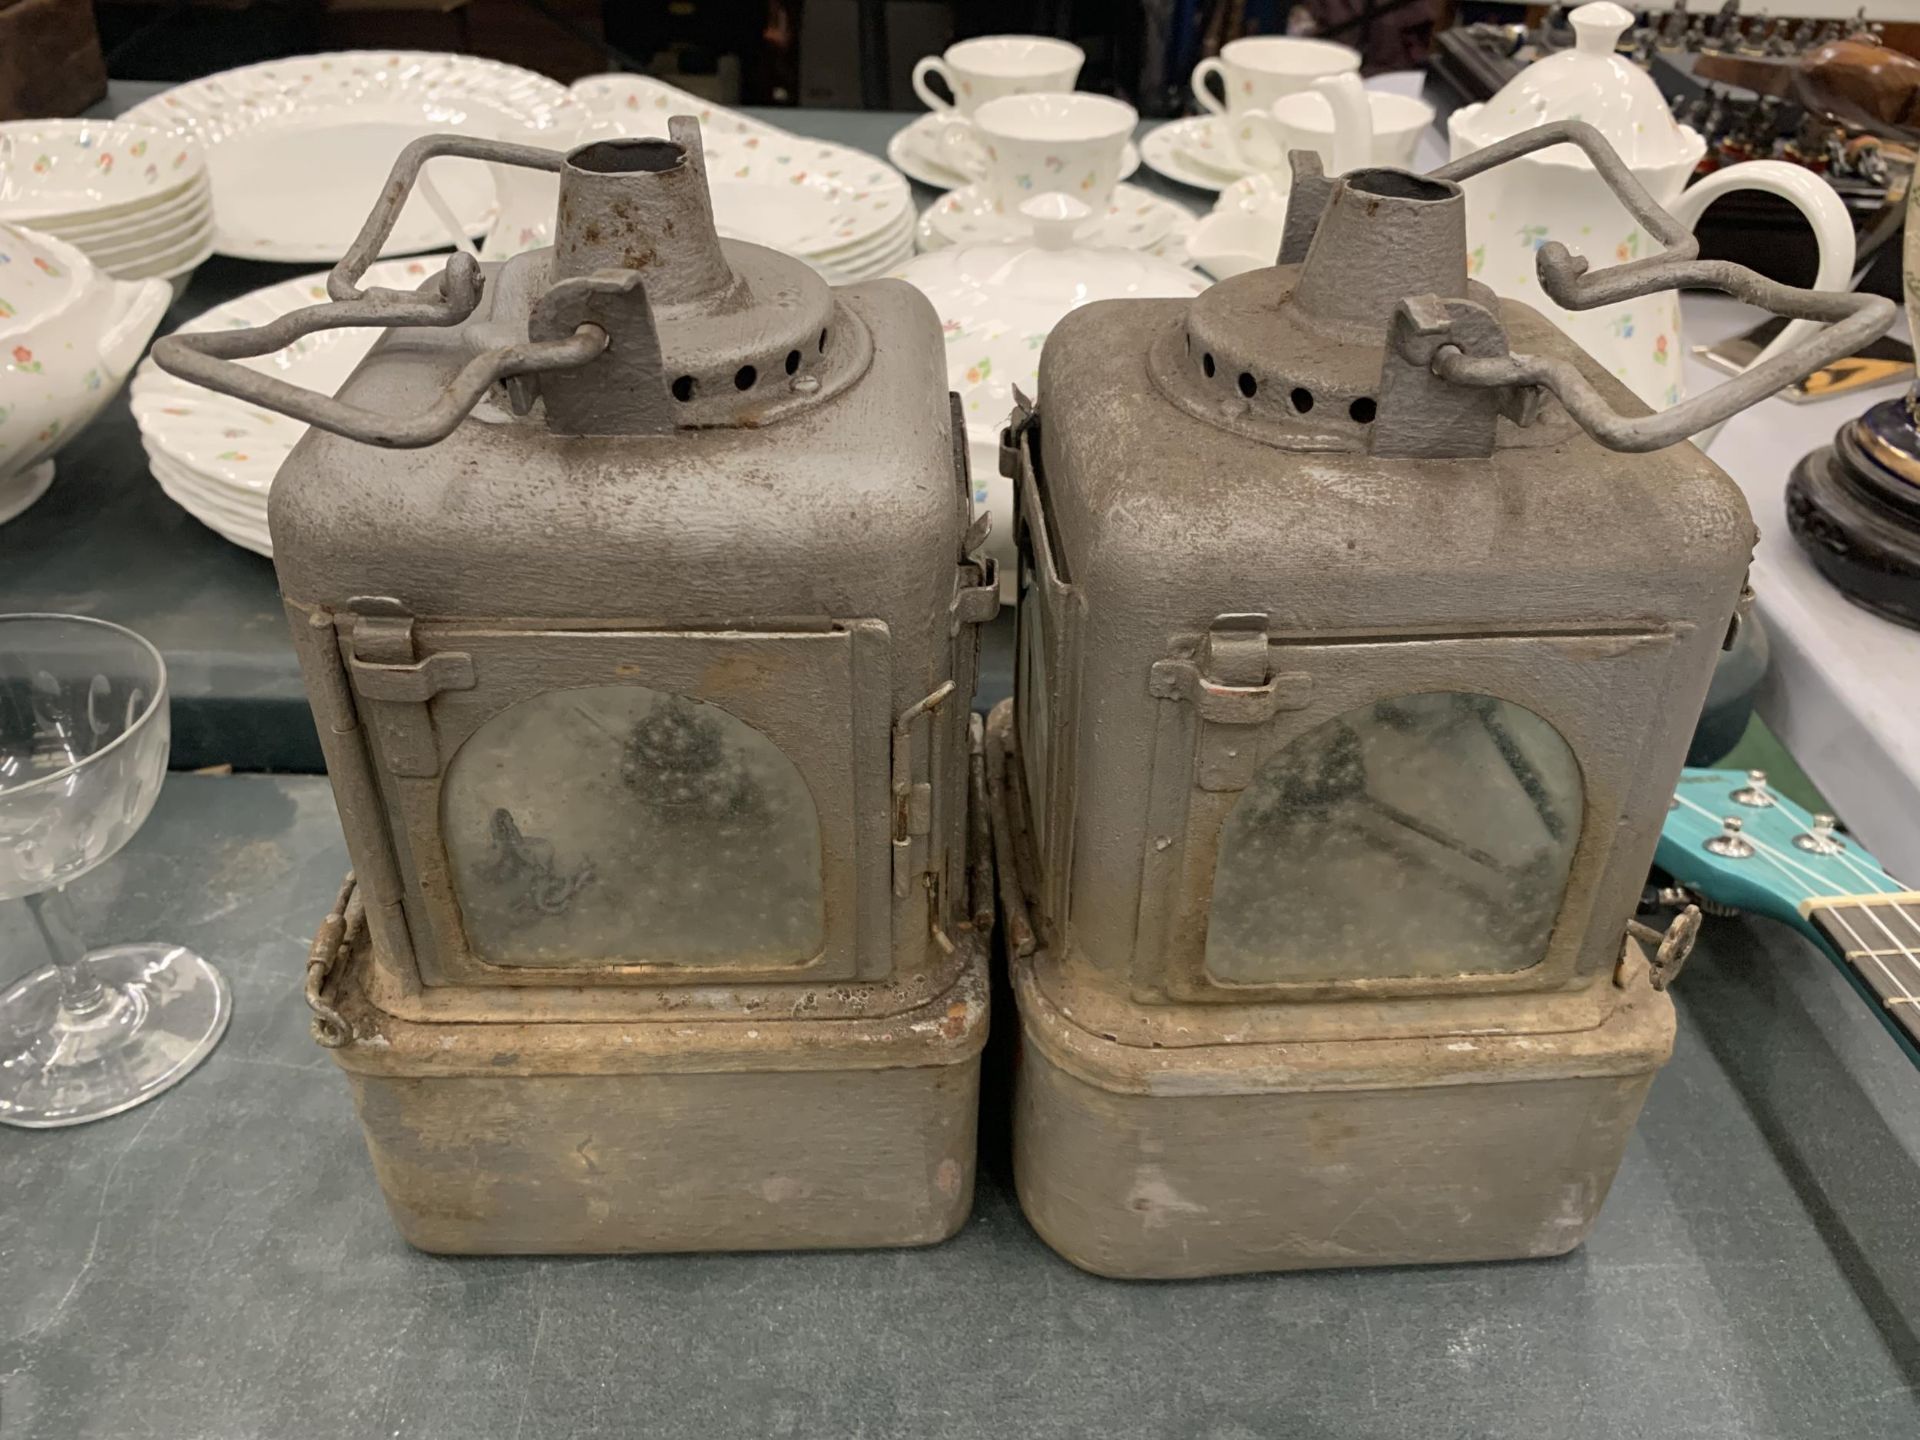 A PAIR OF VINTAGE BRITISH RAIL RAILWAY LAMPS - Image 3 of 3